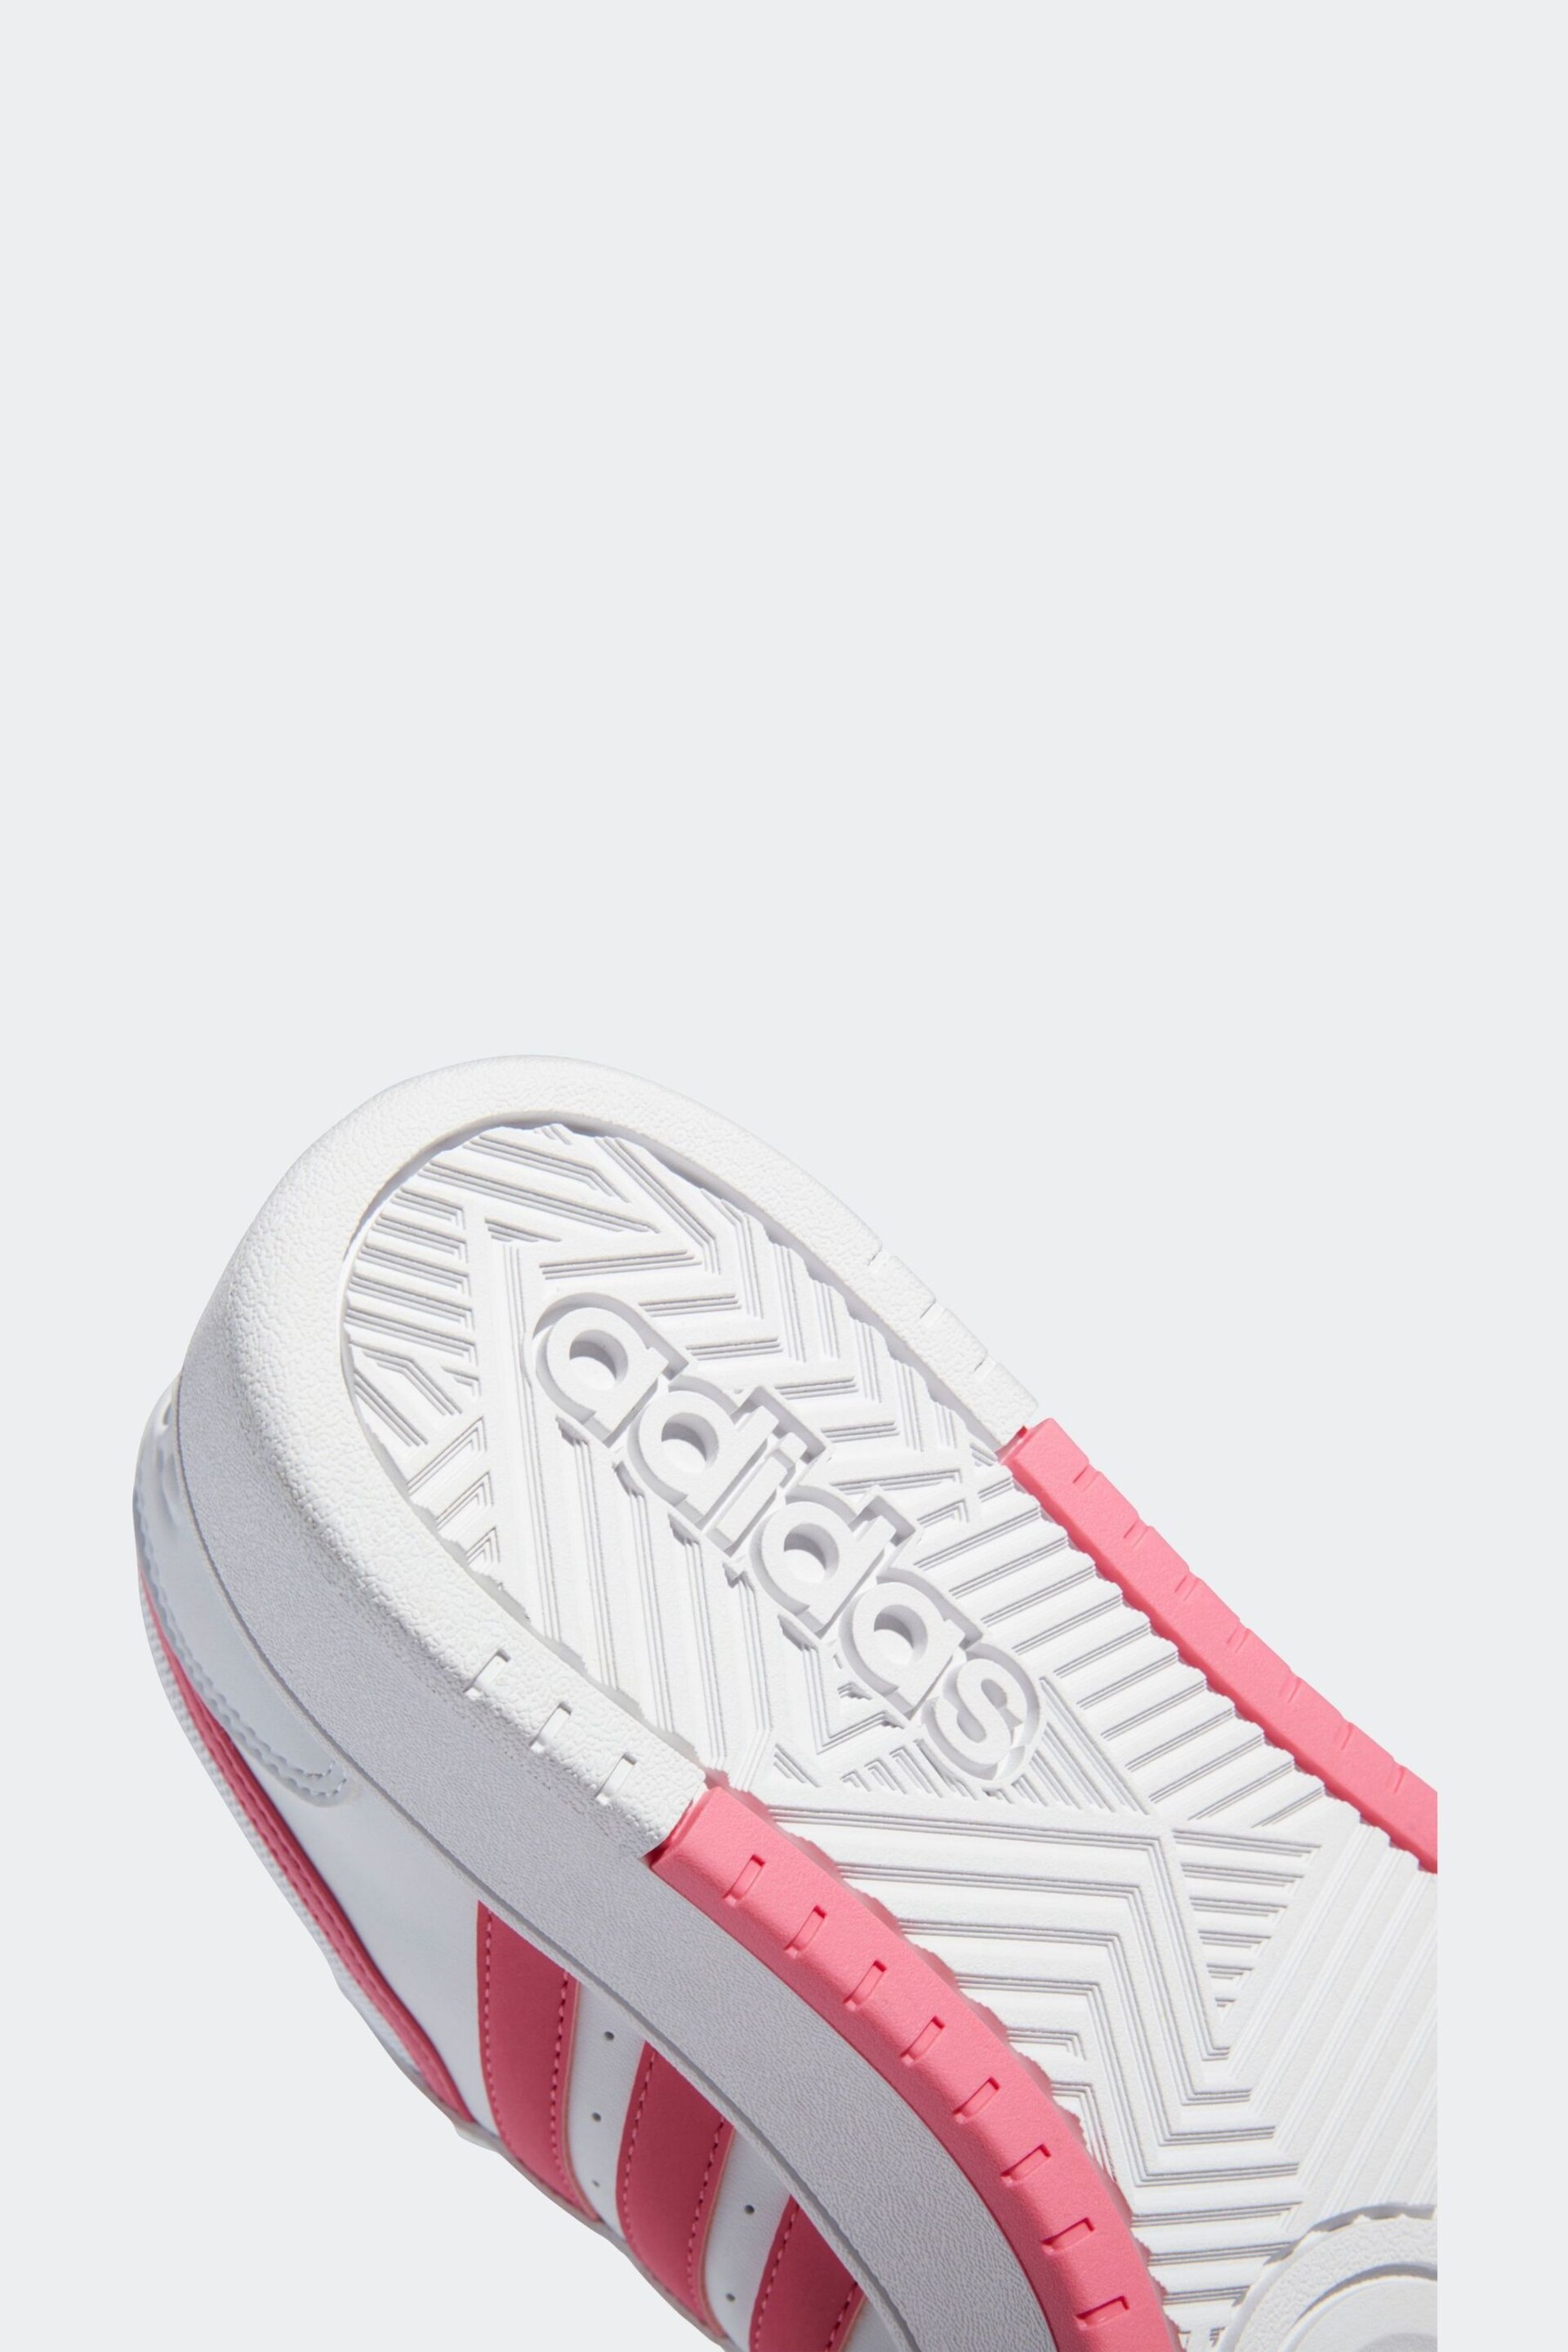 adidas Originals White/Pink Hoops 3.0 Bold Trainers - Image 7 of 9